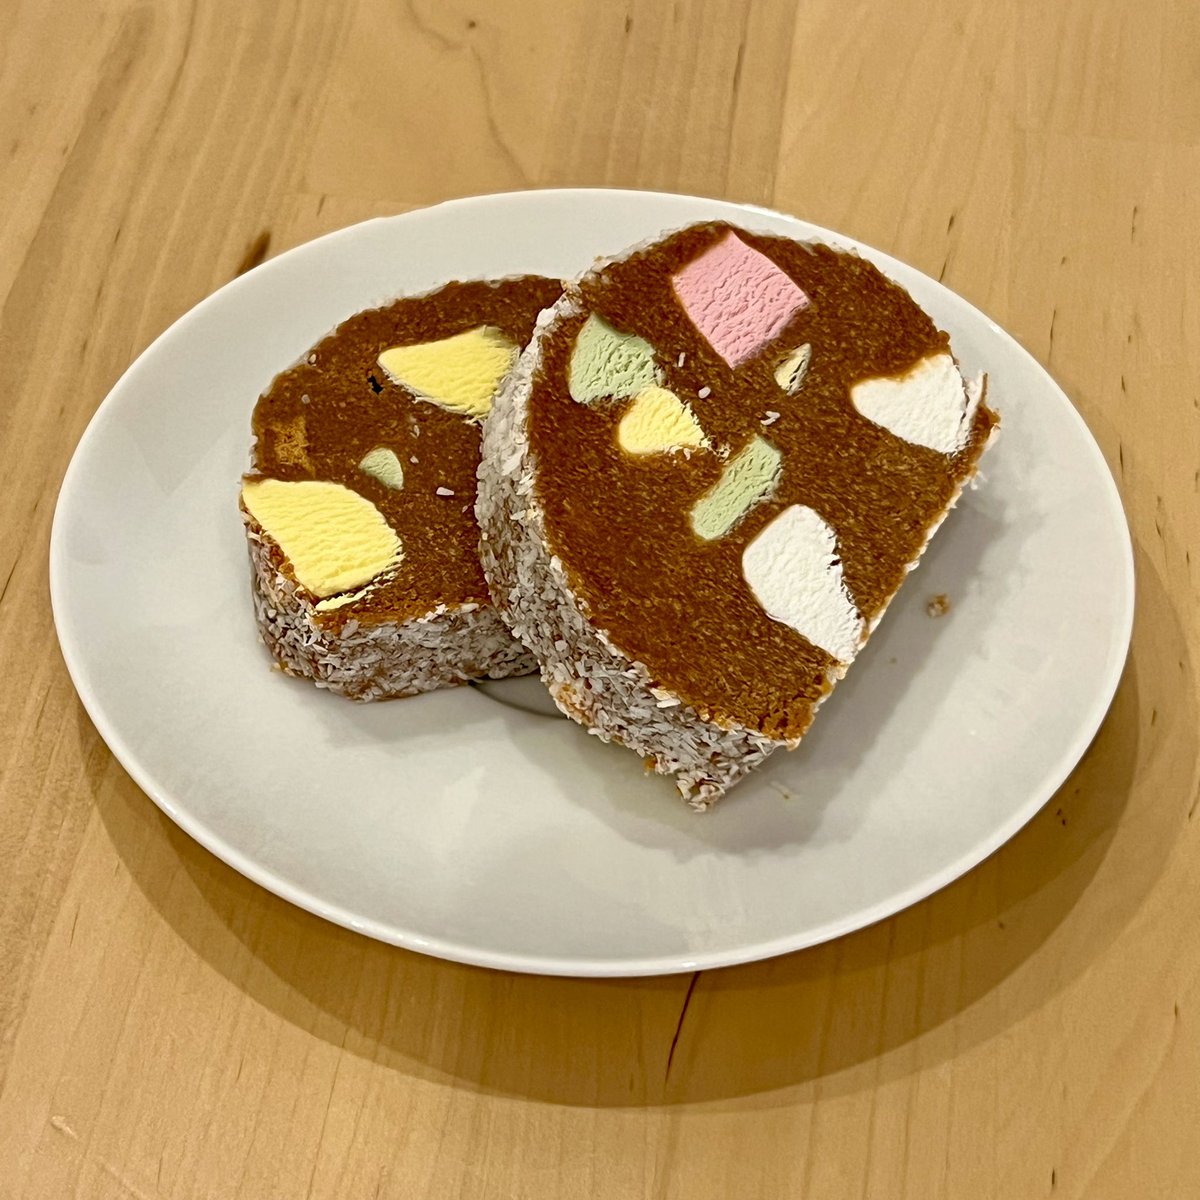 Sometimes, when home feels a long way away, there’s nothing like baking treats from 🇳🇿 New Zealand to make it feel that little bit closer. Presenting the world-famous (in #NZ at least…) Lolly Cake! The Vienna edition, which we like to think is almost as good. 😉 #lollycake 🥰